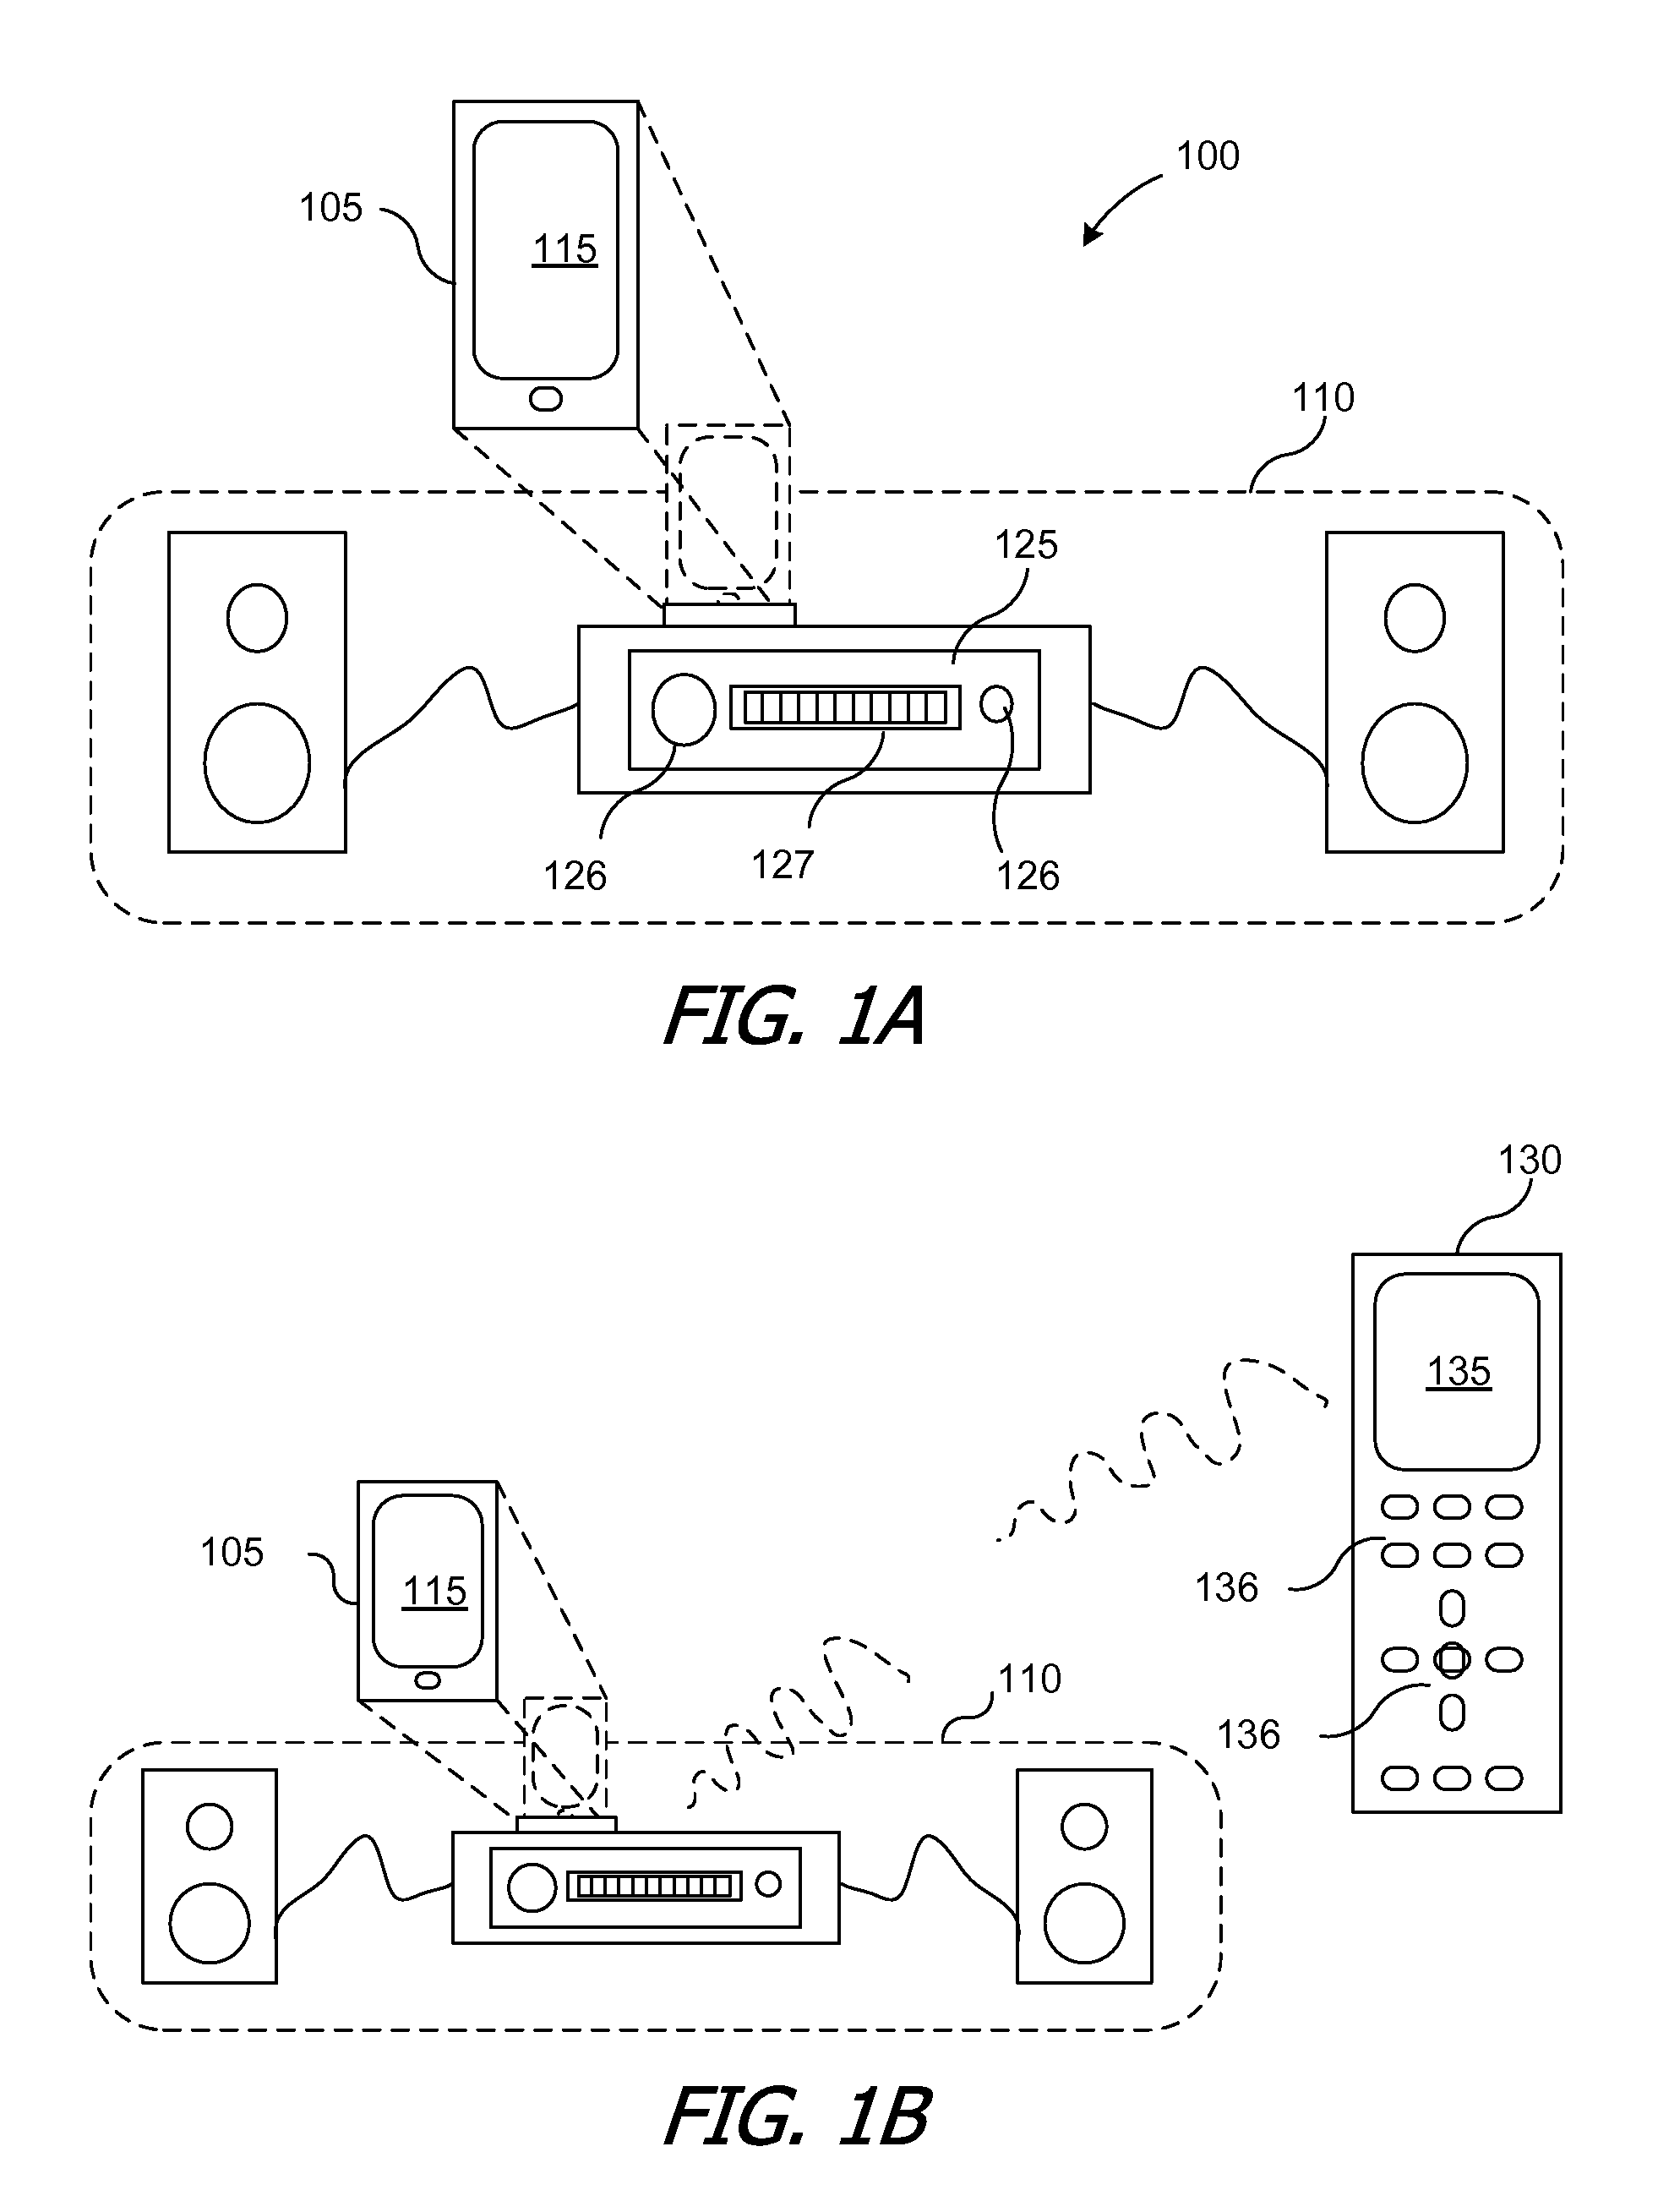 Protocol for remote user interface for portable media device with dynamic playlist management